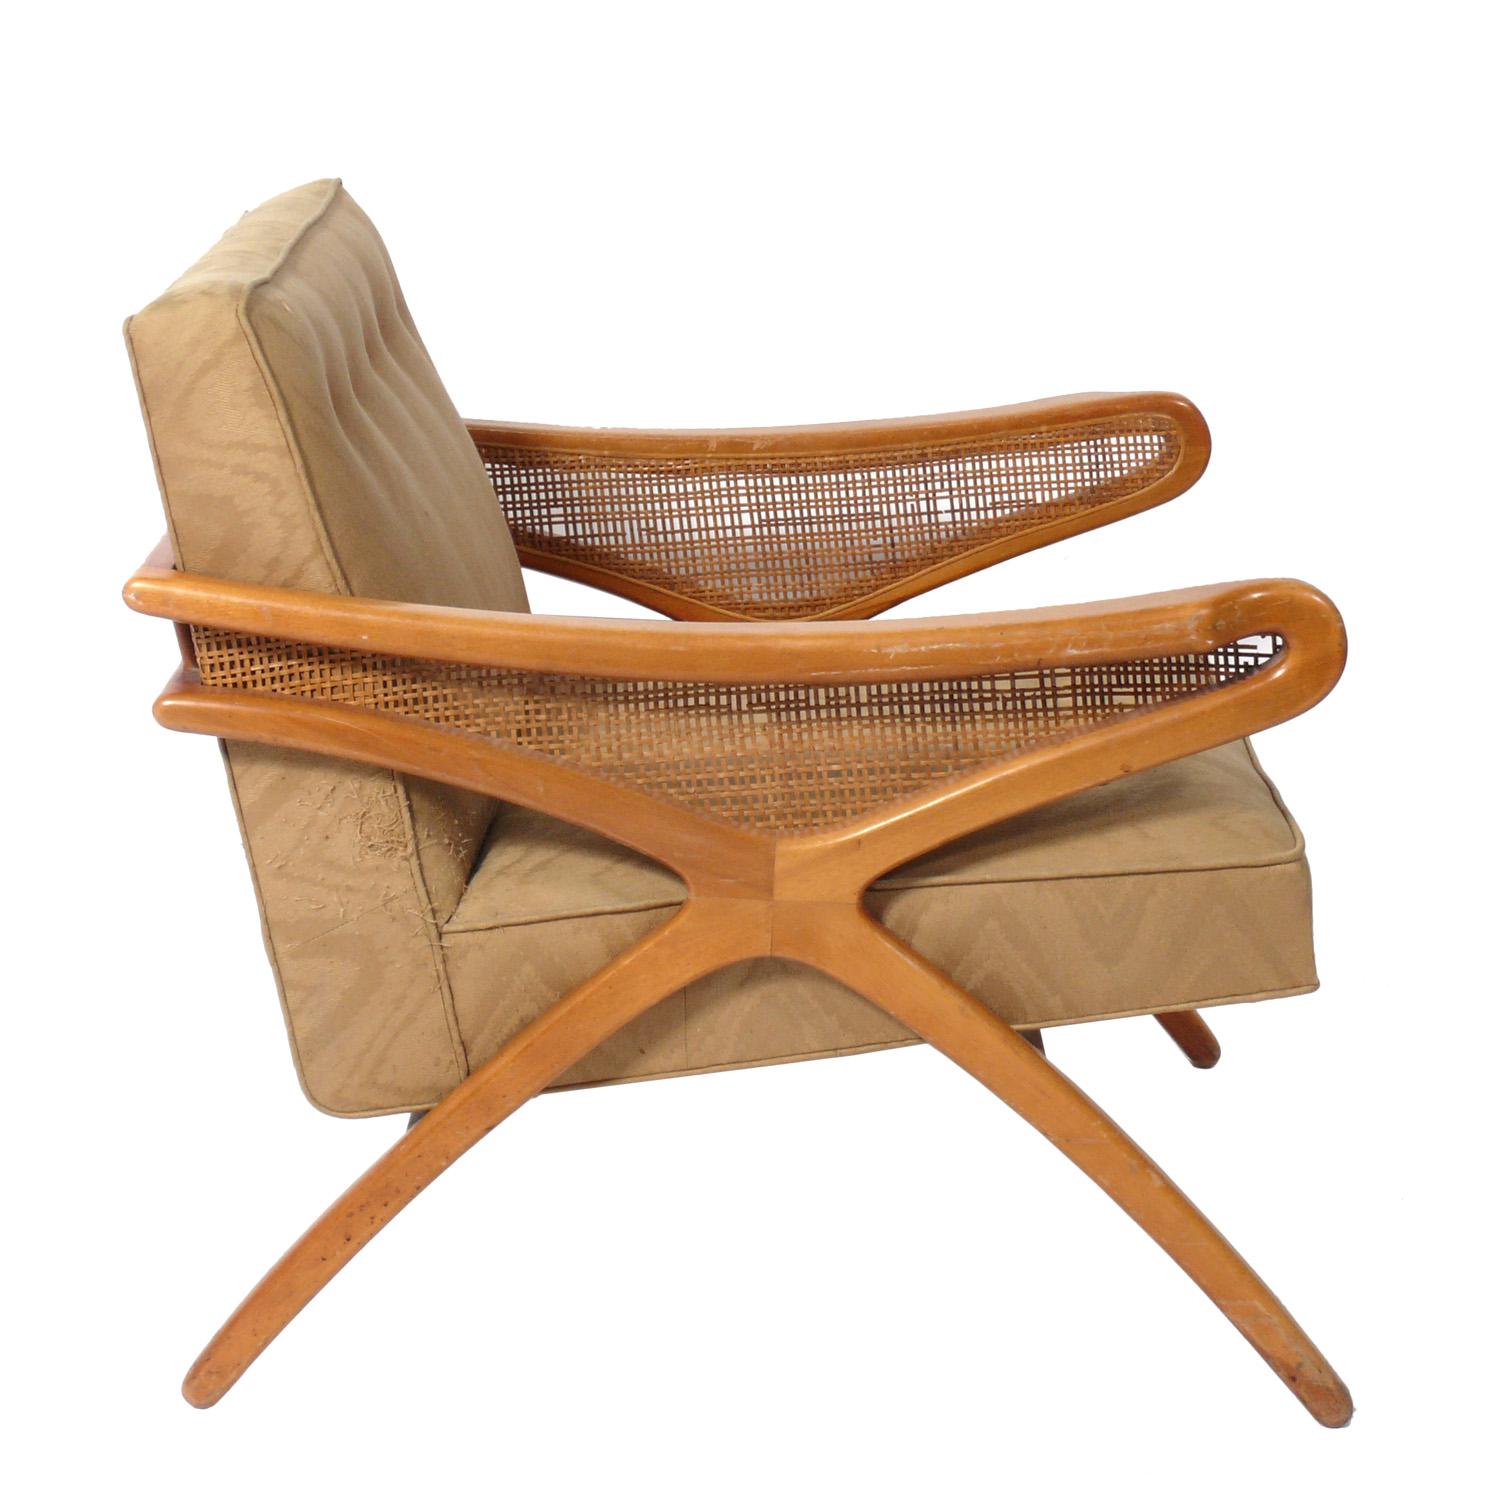 Pair of caned mid century lounge chairs, American, circa 1960s. These chairs are being completely restored. The price noted includes refinishing in your choice of color and reupholstery in your fabric. Simply send us 8 yards of your fabric after